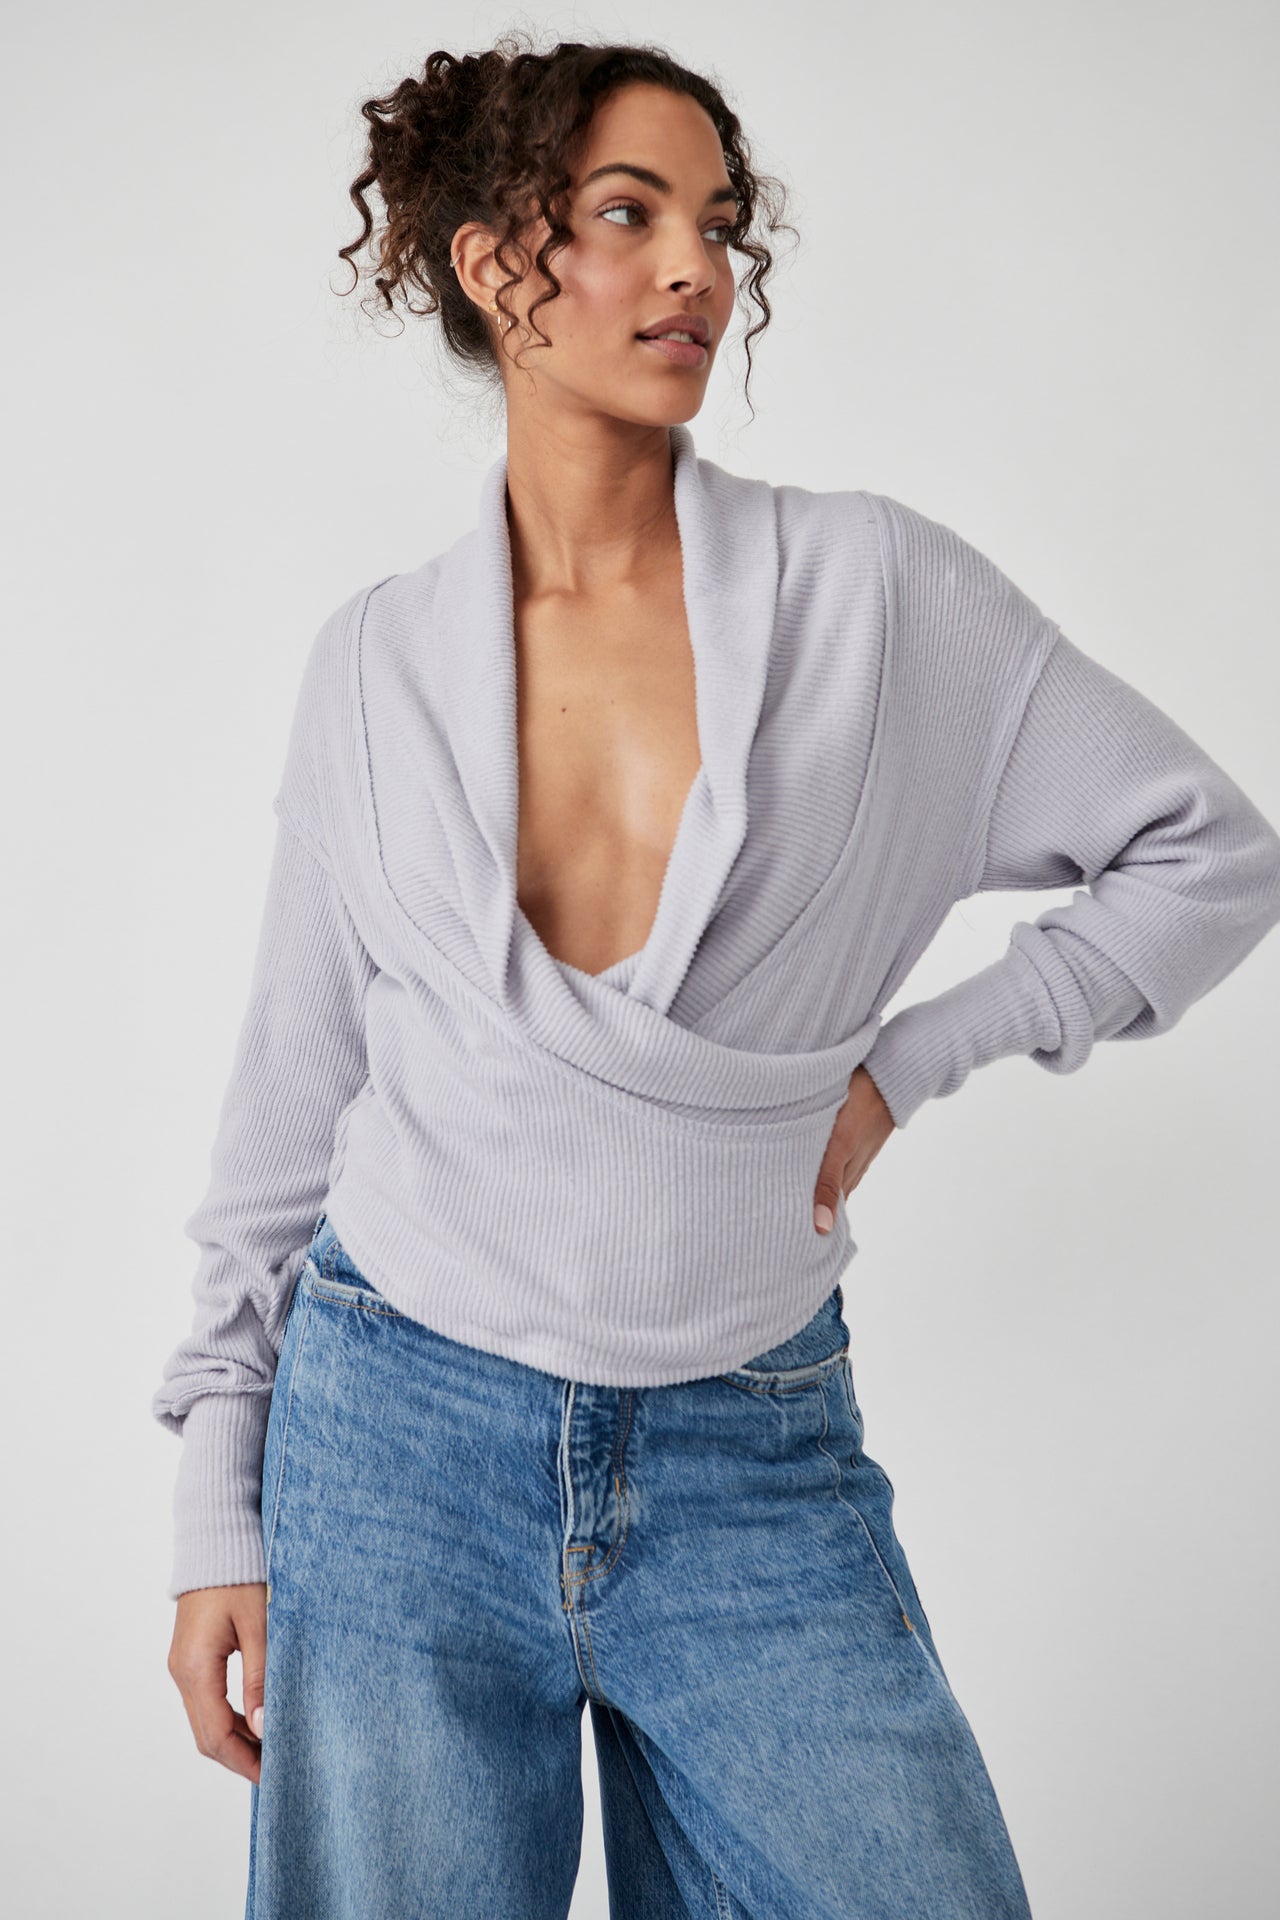 Hold Me Close Chambray Sky, Sweater by Free People | LIT Boutique